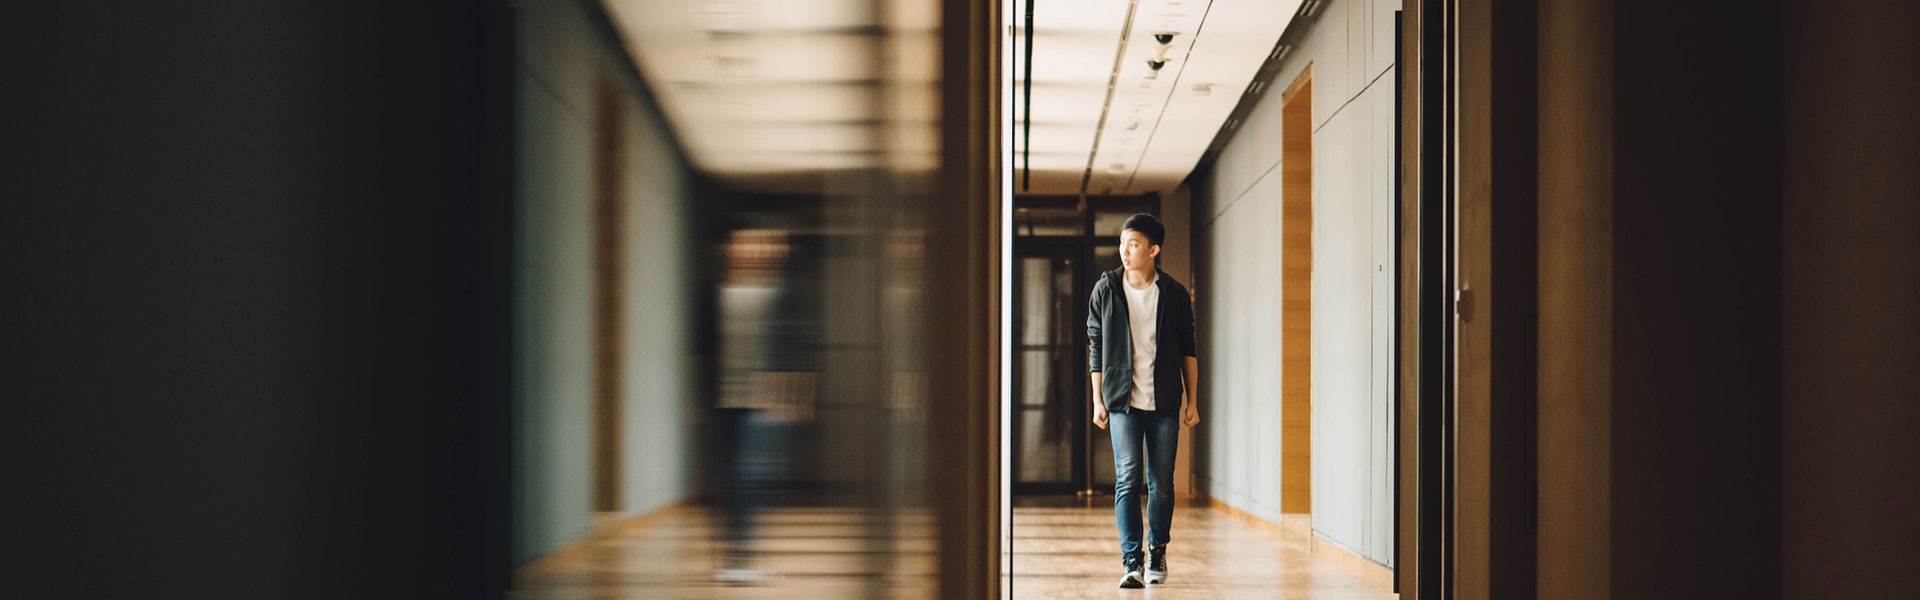 A teen walking down a hall | a photo illustrating an article on the importance of teen identity development and formation | ThreePeaks Residential Treatment Center for Teens